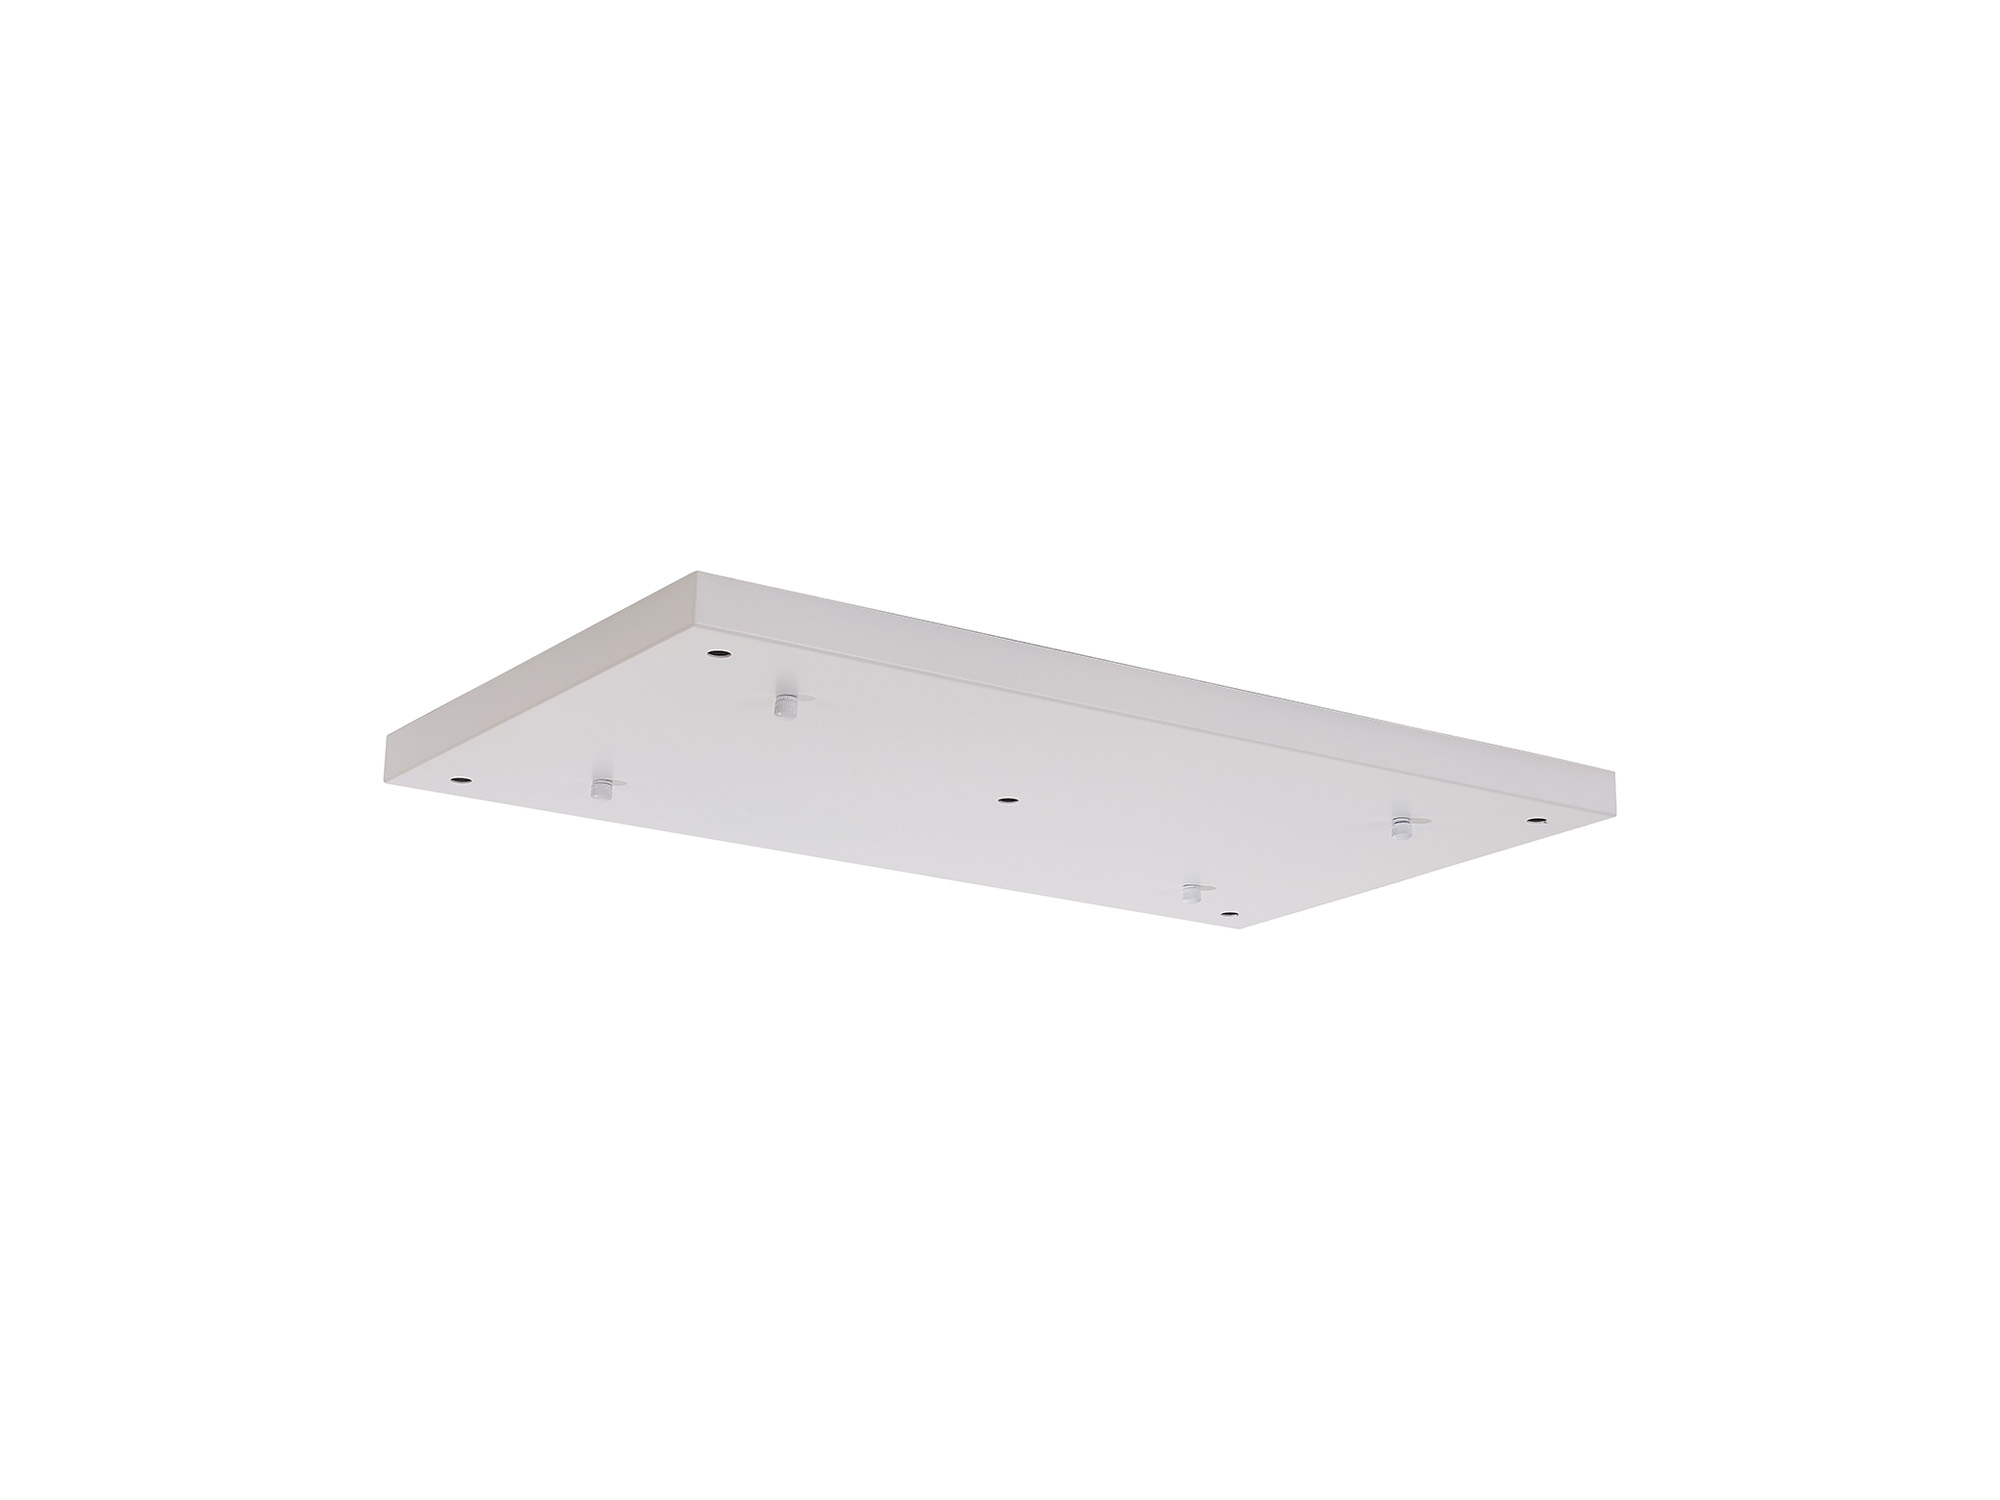 D0887WH  Hayes 5 Hole 550mm x 320mm Linear Rectangle Ceiling Plate White